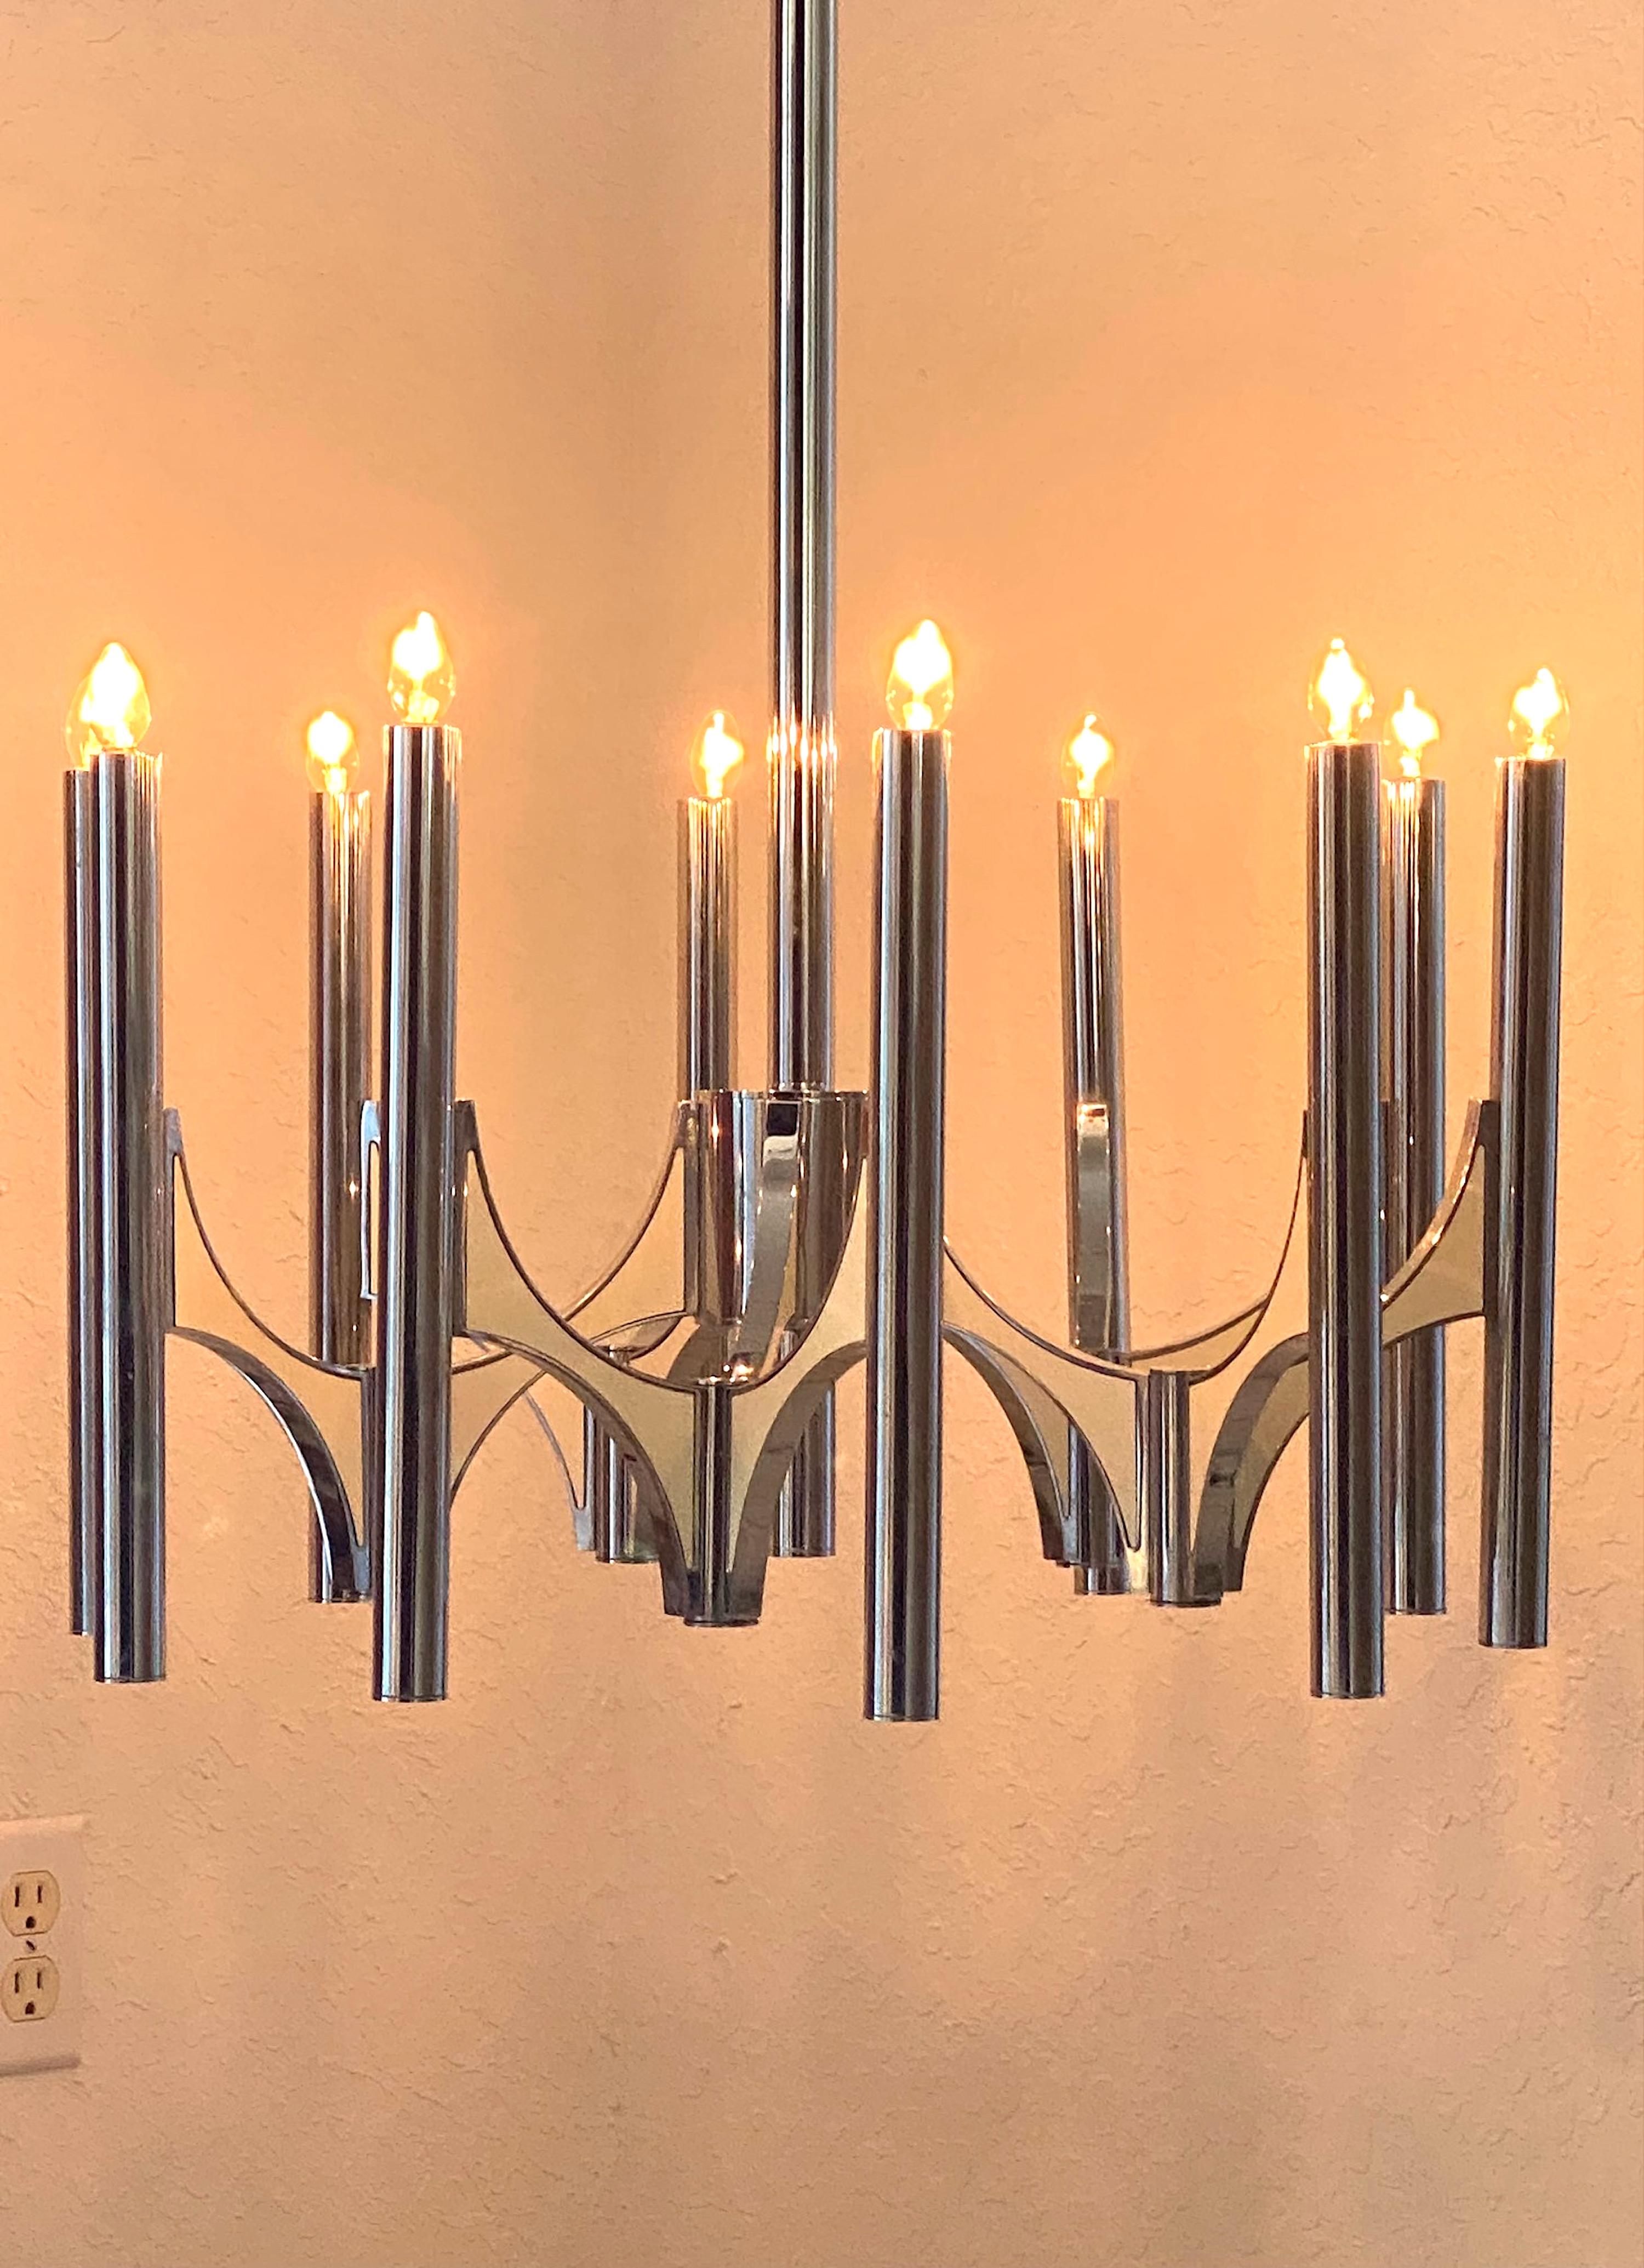 Interesting Gaetano Sciolari 10 ligths Chandelier, each tube holds a  candelabra light bulb and metal panels on the arms. 
The enameled metal panels hold each other with magnets.
The original Sciolari sticker still in place.
Please note, we have a